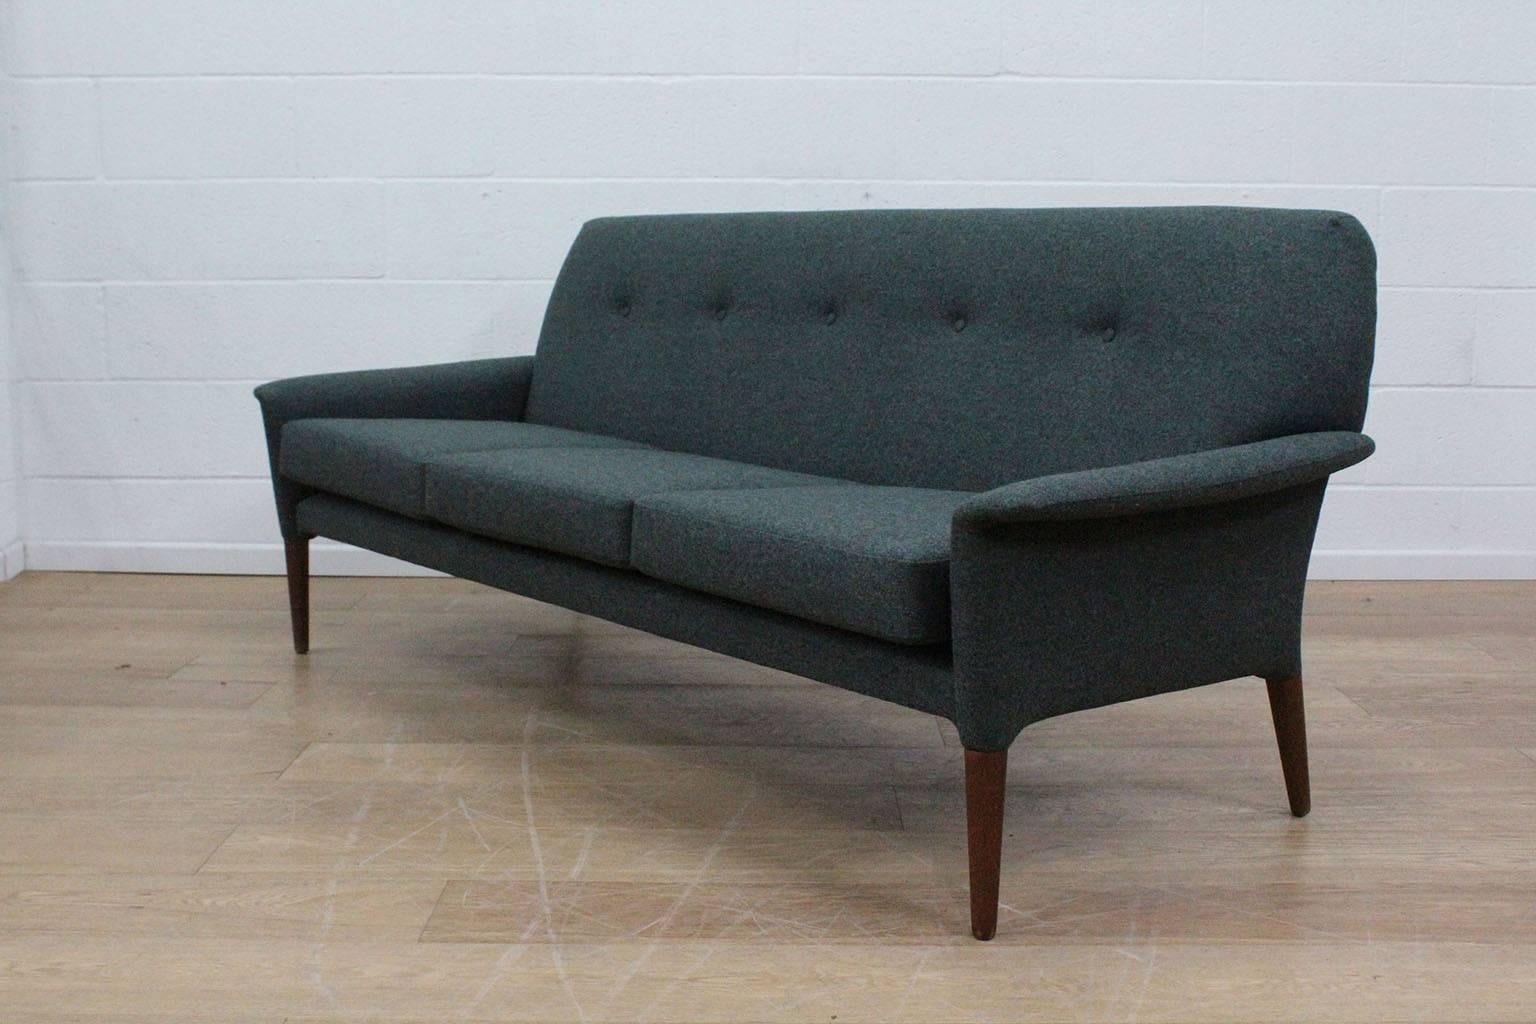 A Hans Olsen designed sofa with much provenance and grace. It has the most beautiful, unusual legs that seem to pour out of the main frame. The angle on those back legs is exquisite and needs to be admired. A collector’s piece but restored with love